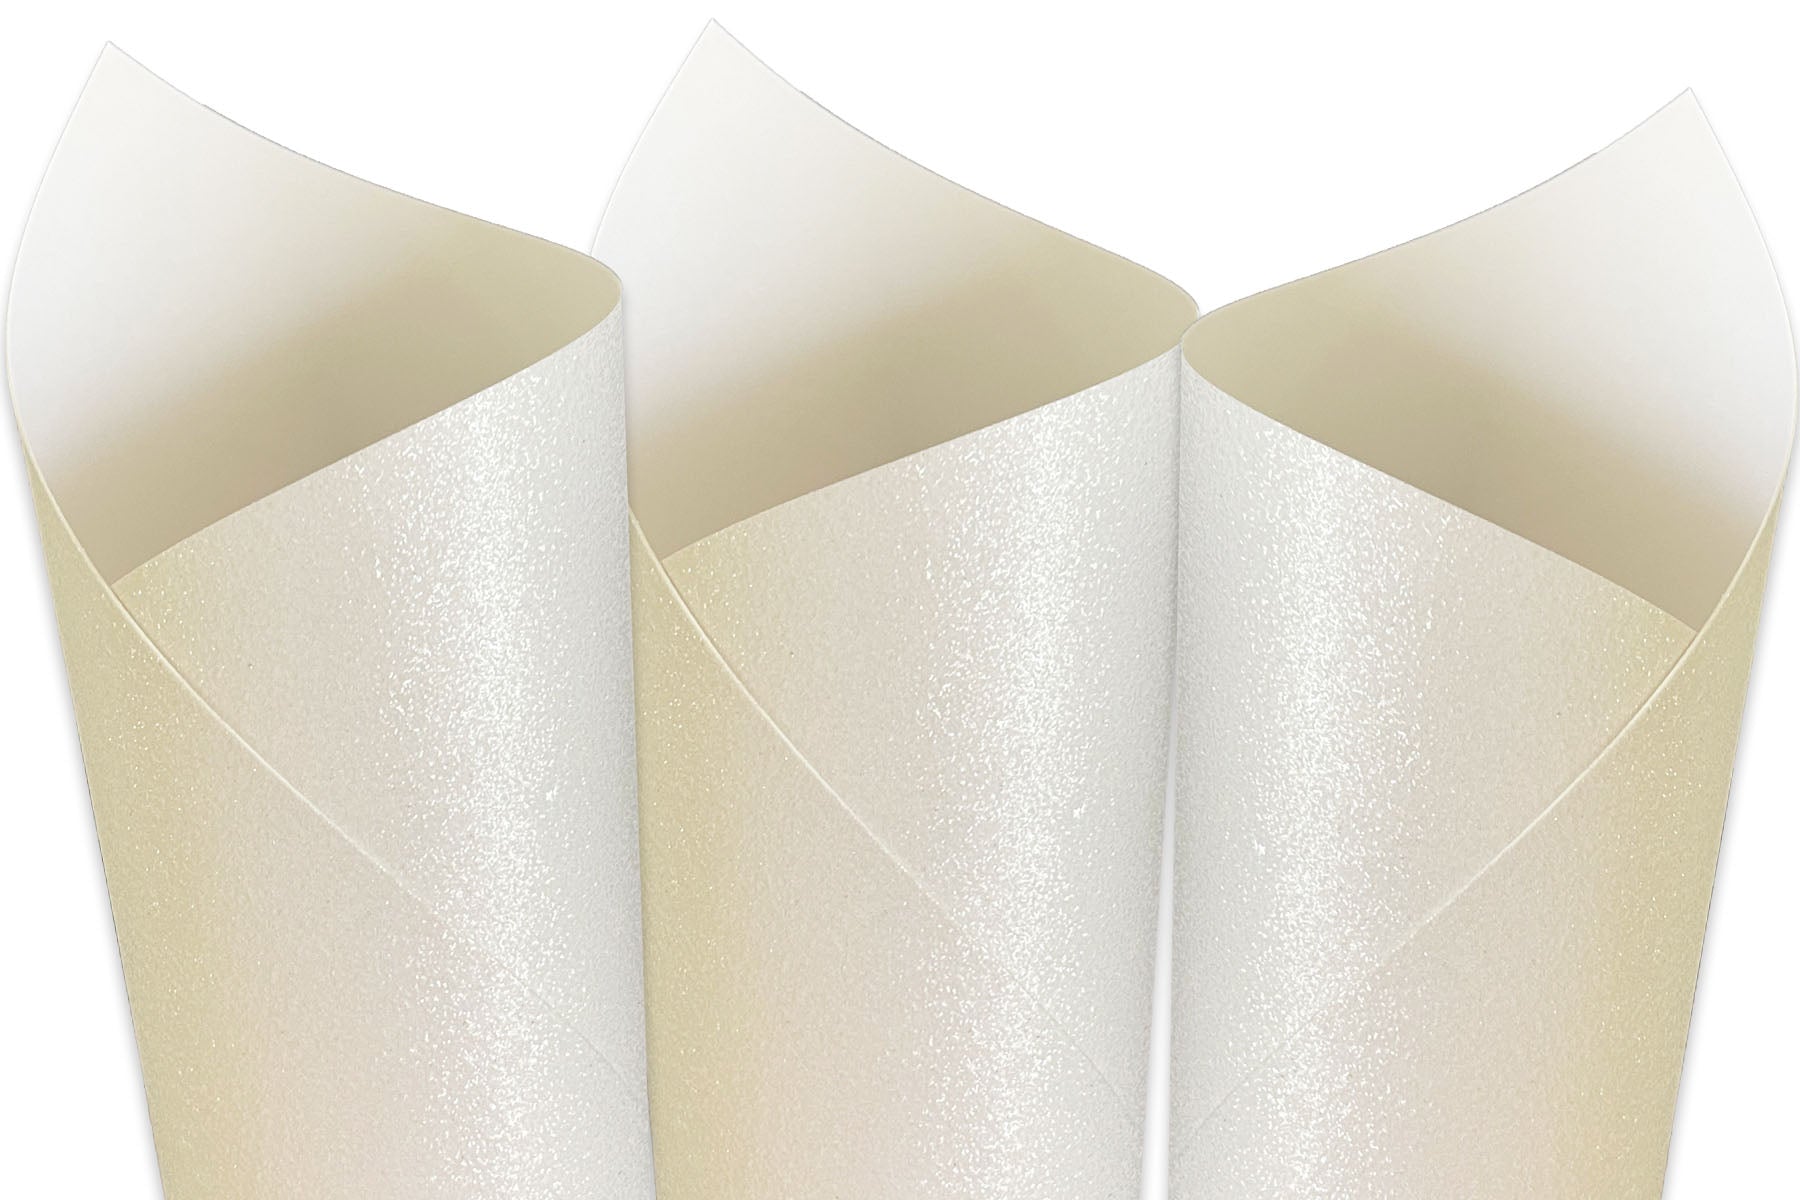 Pen + Gear White Glitter Cardstock Paper, 8.5 inch x 11 inch, 104 lb., 40 Sheets, Size: 40 Sheets